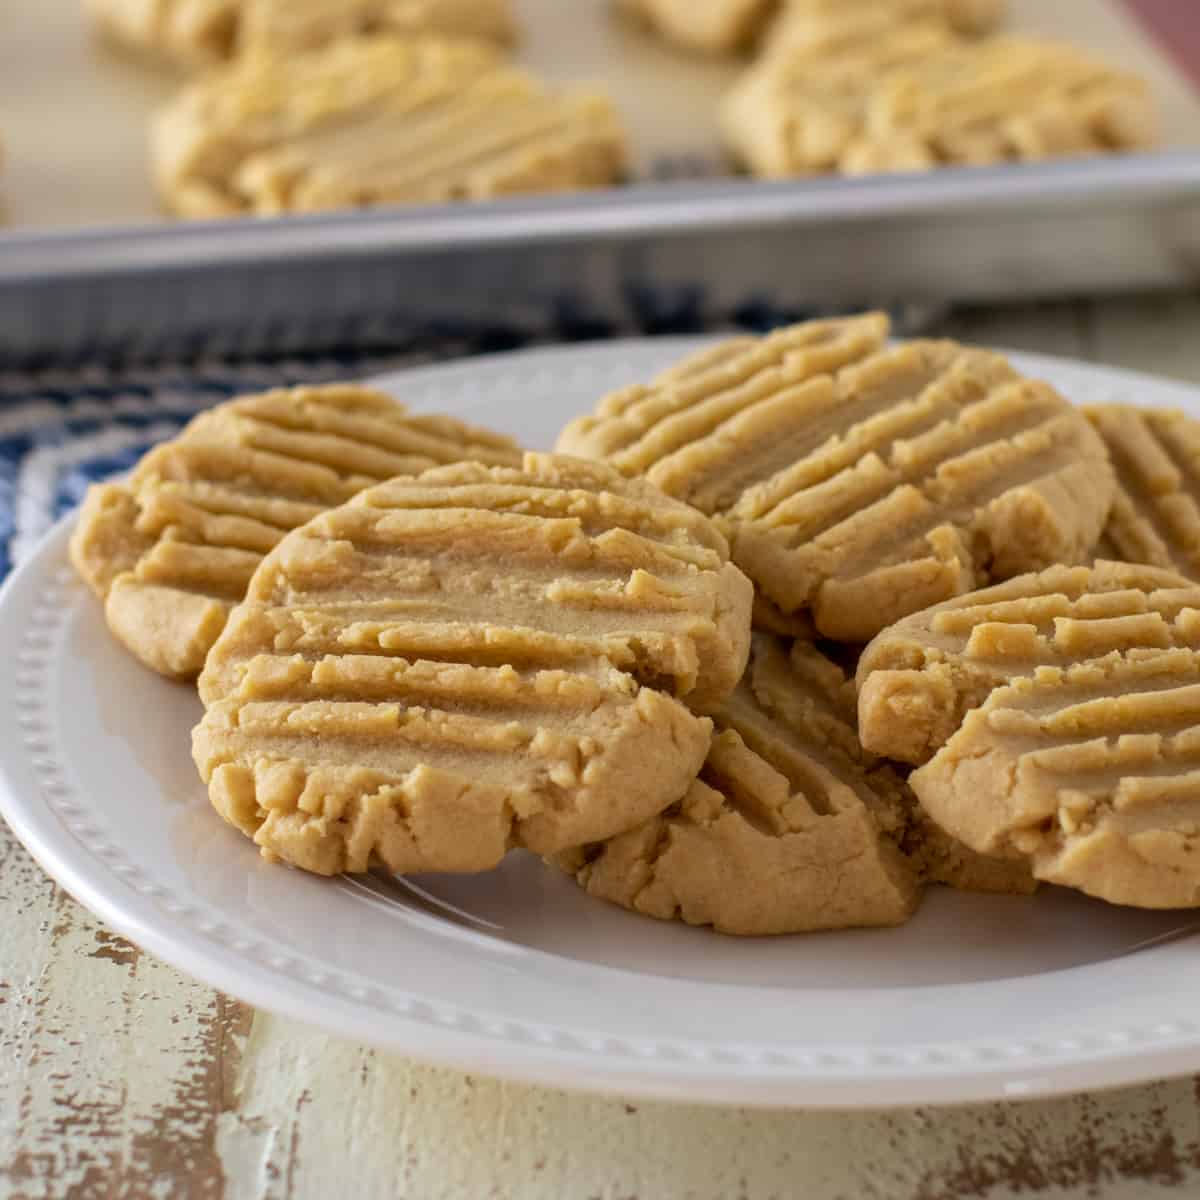 A close up picture of cookies on a plate.